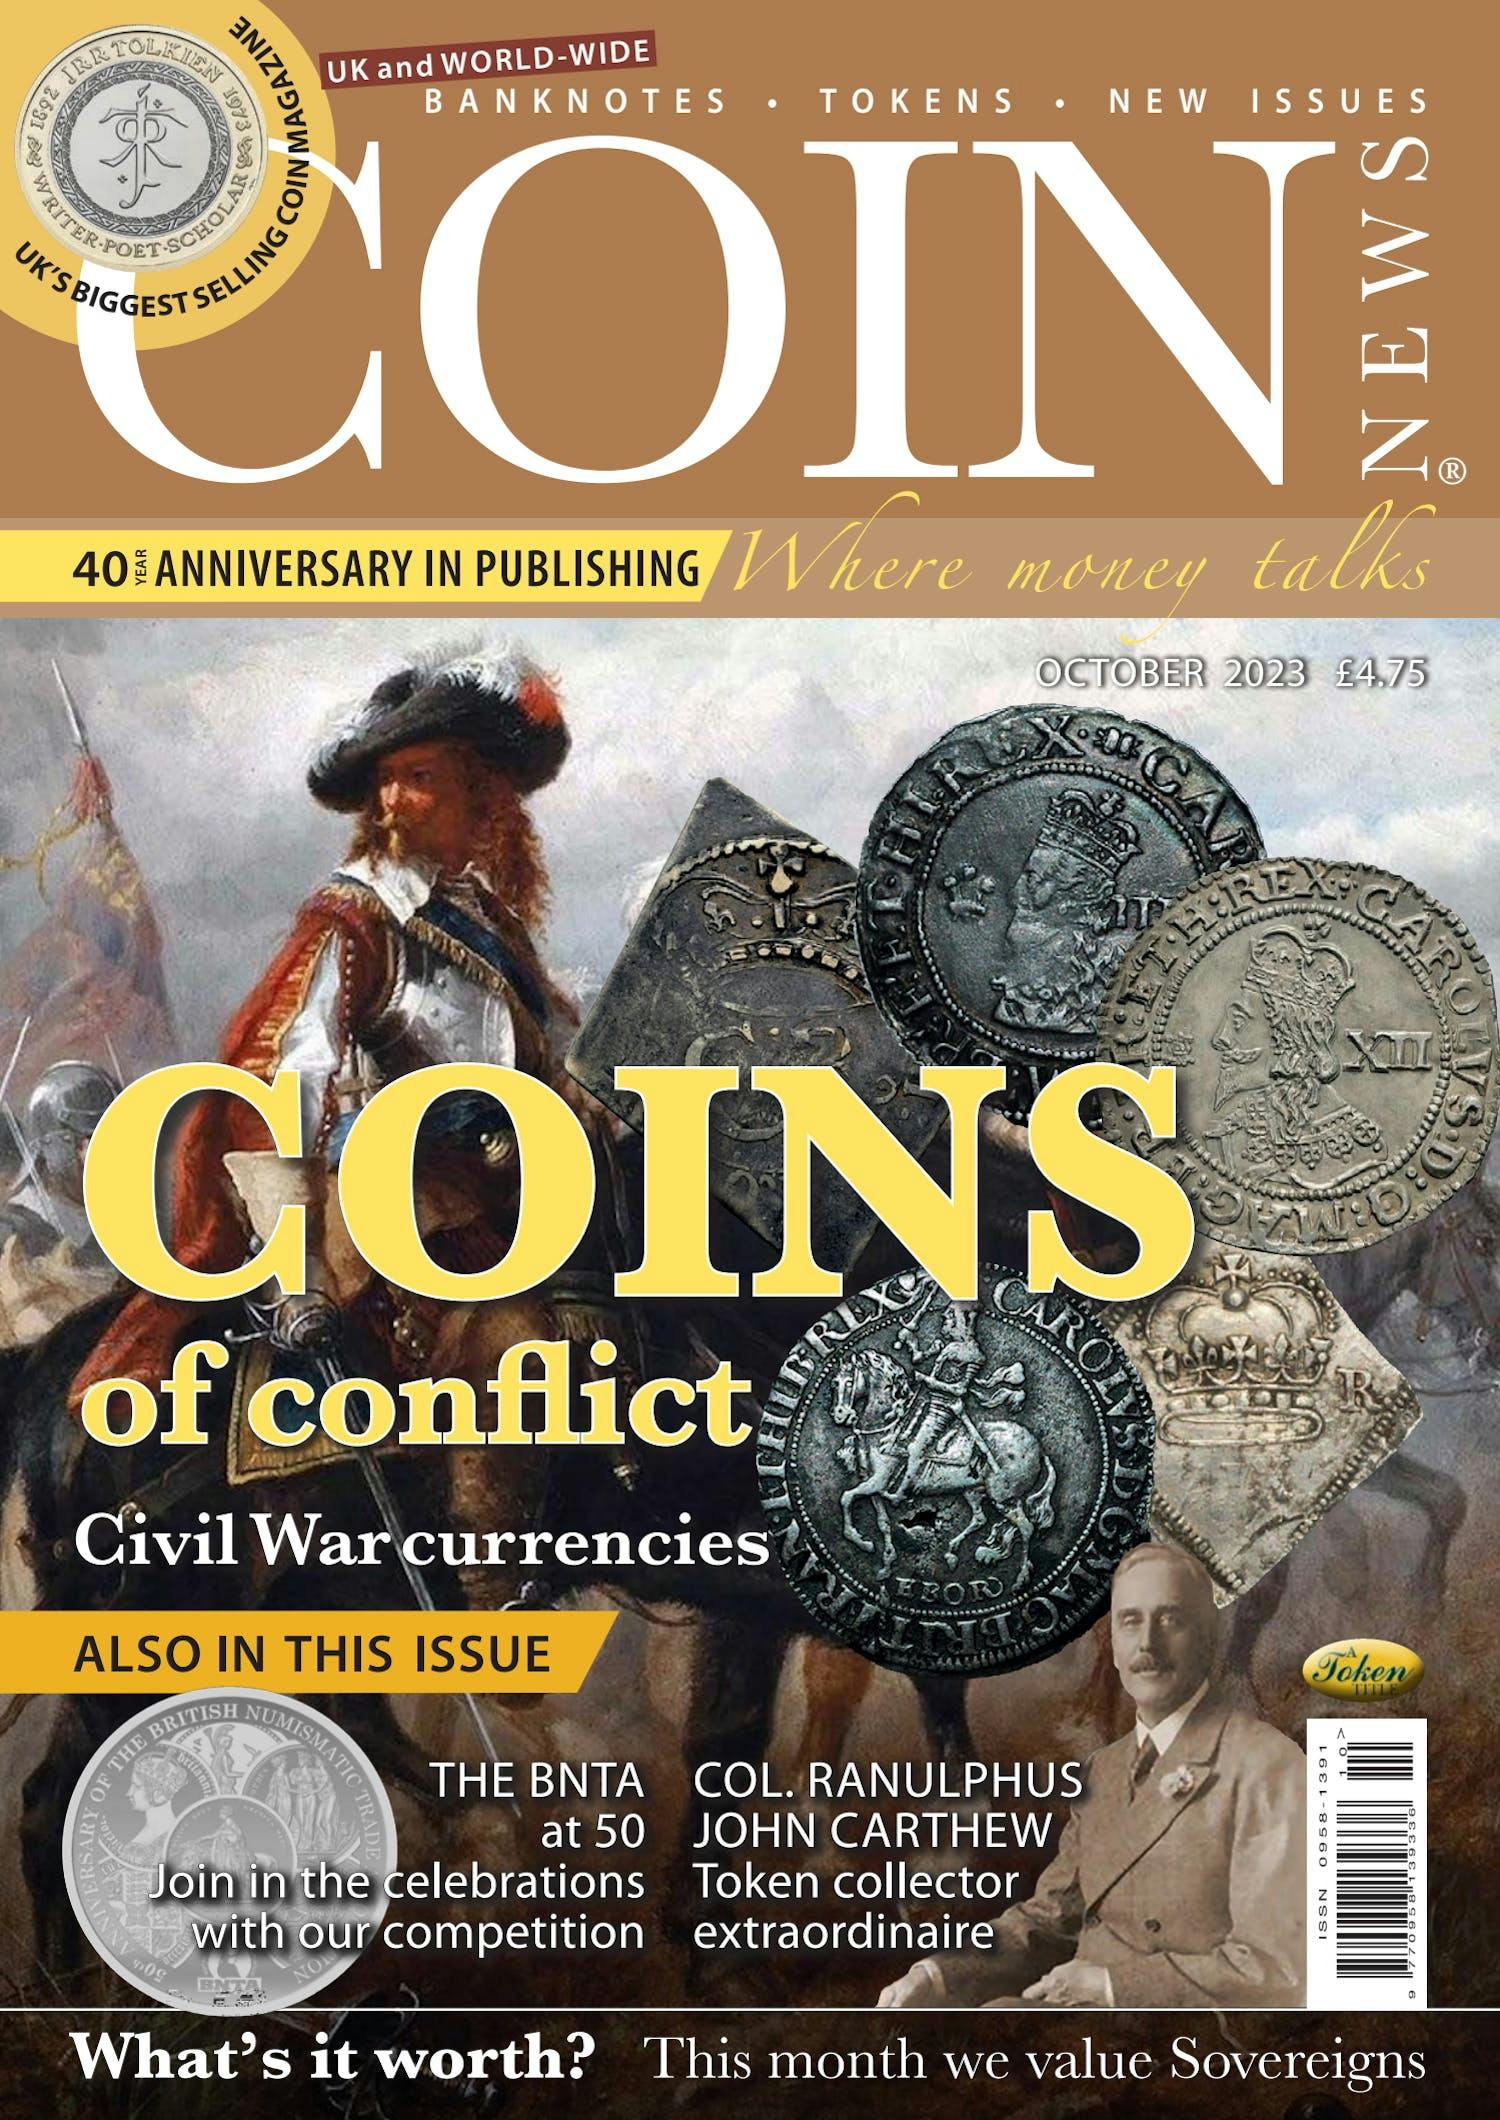 The front cover of Coin News, October 2023 - Volume 60, Number 10